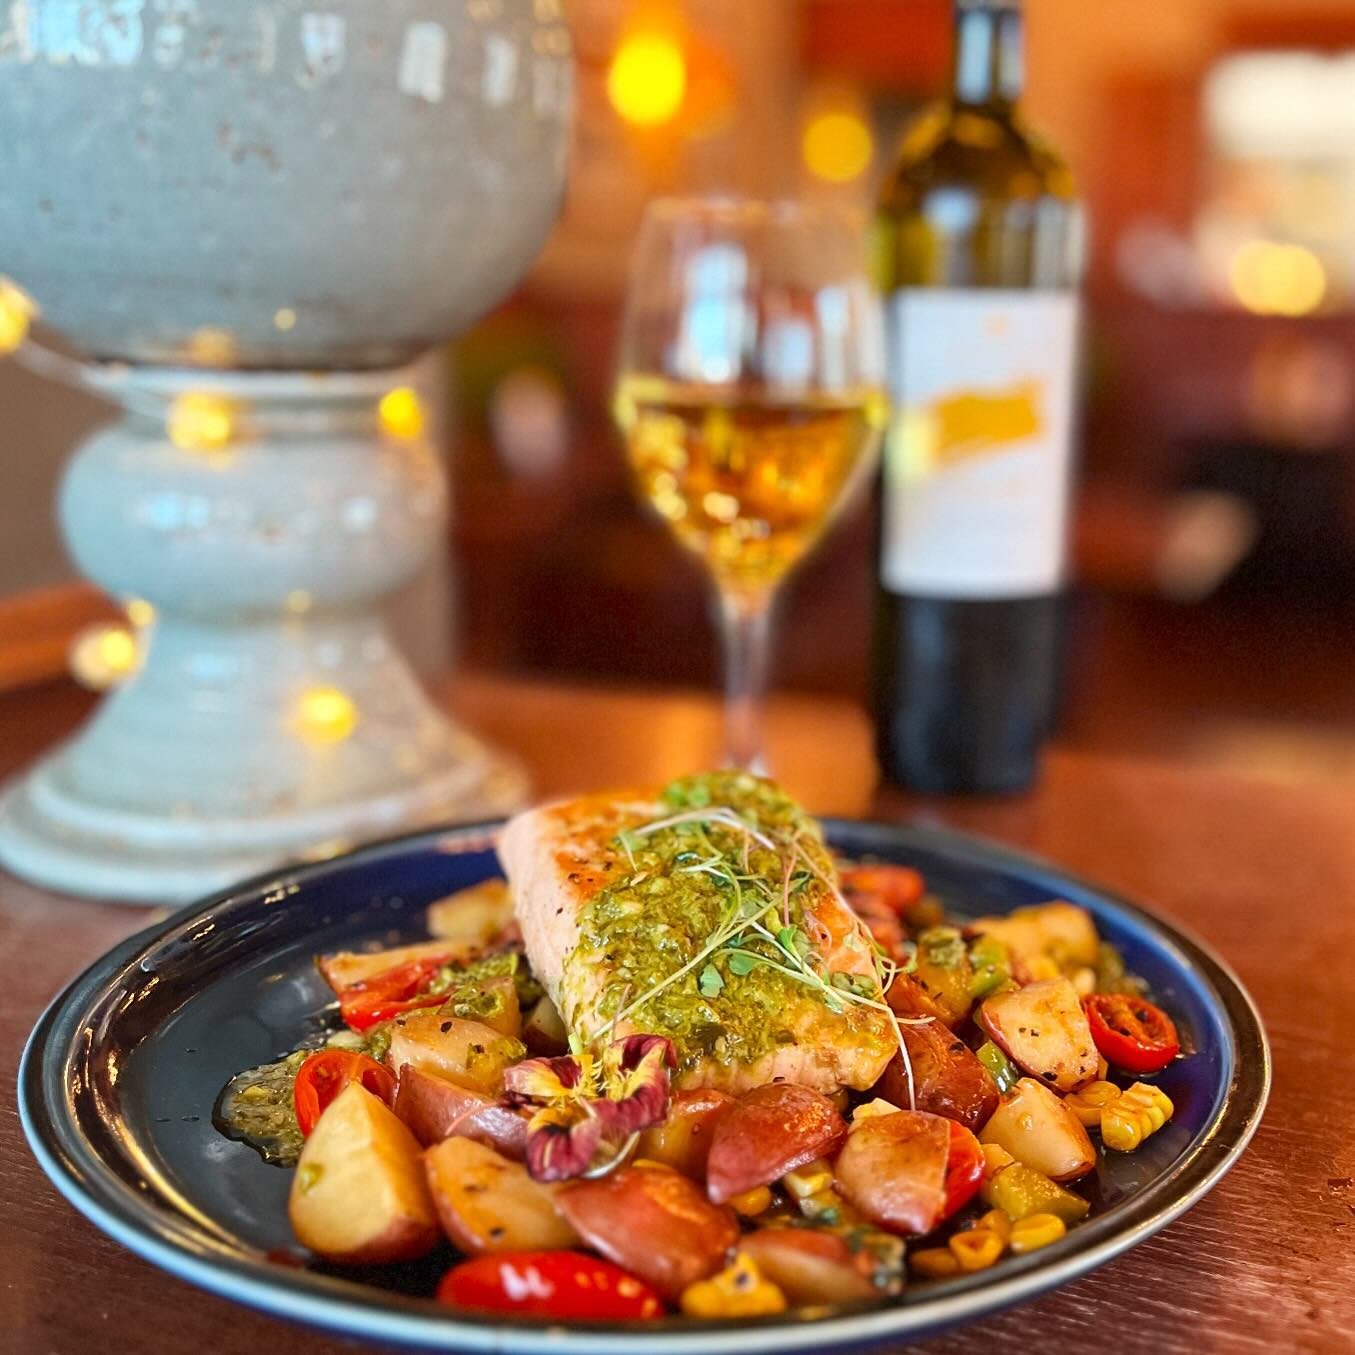 We are ramping up for warmer weather with this salmon special! 6oz salmon, roasted red potatoes, corn salsa with green peppers, cherry tomatoes, jalape&ntilde;o, green onions; with white wine ramp pesto sauce. 
Don&rsquo;t forget that we are open tom